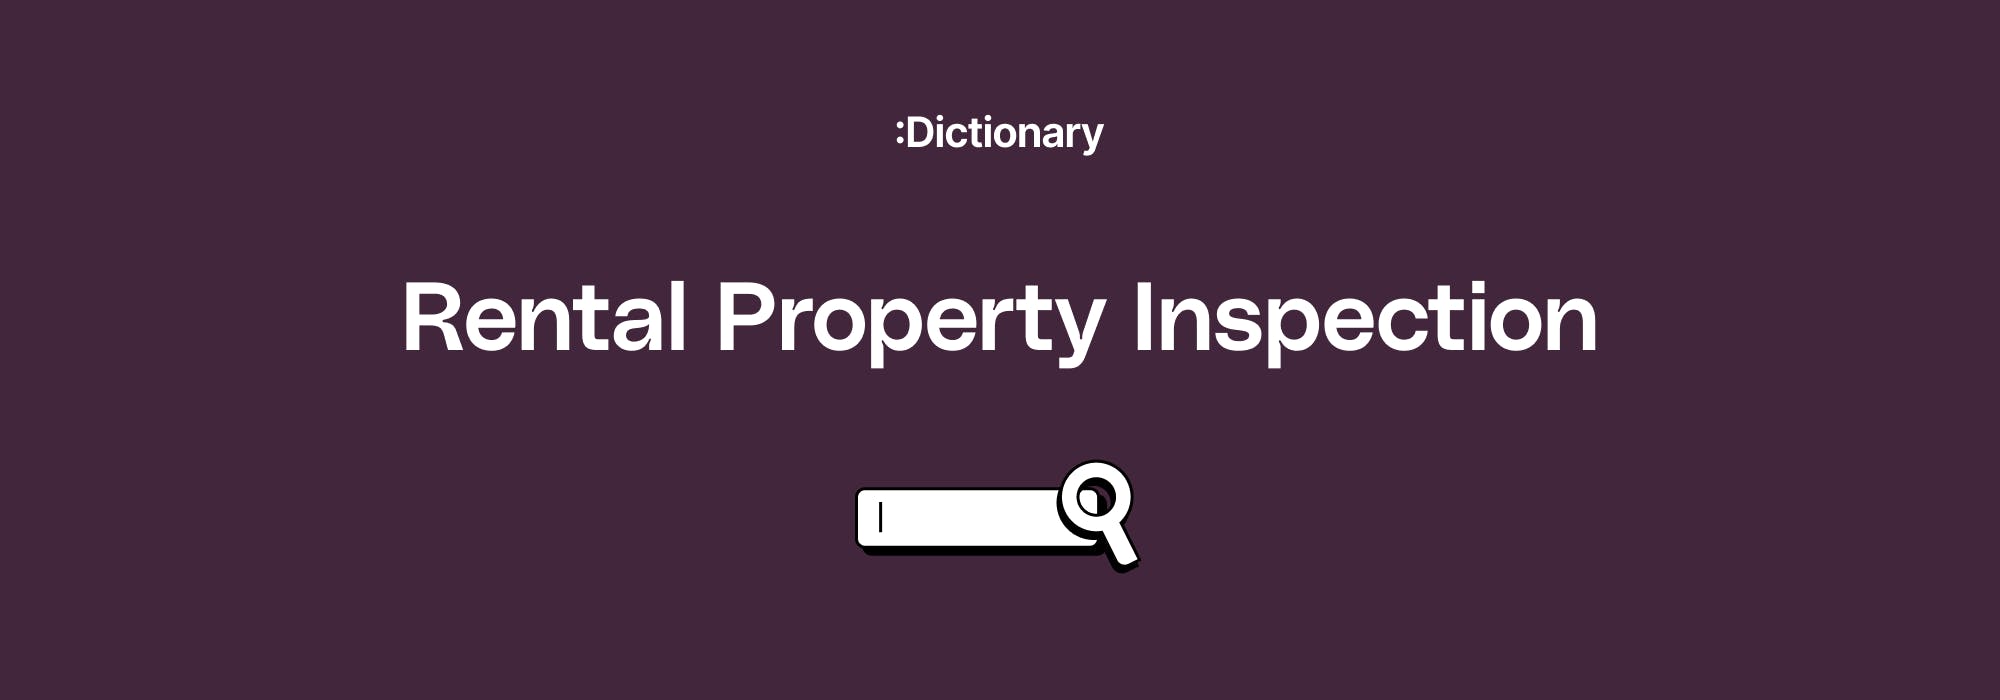 rental property inspection explained